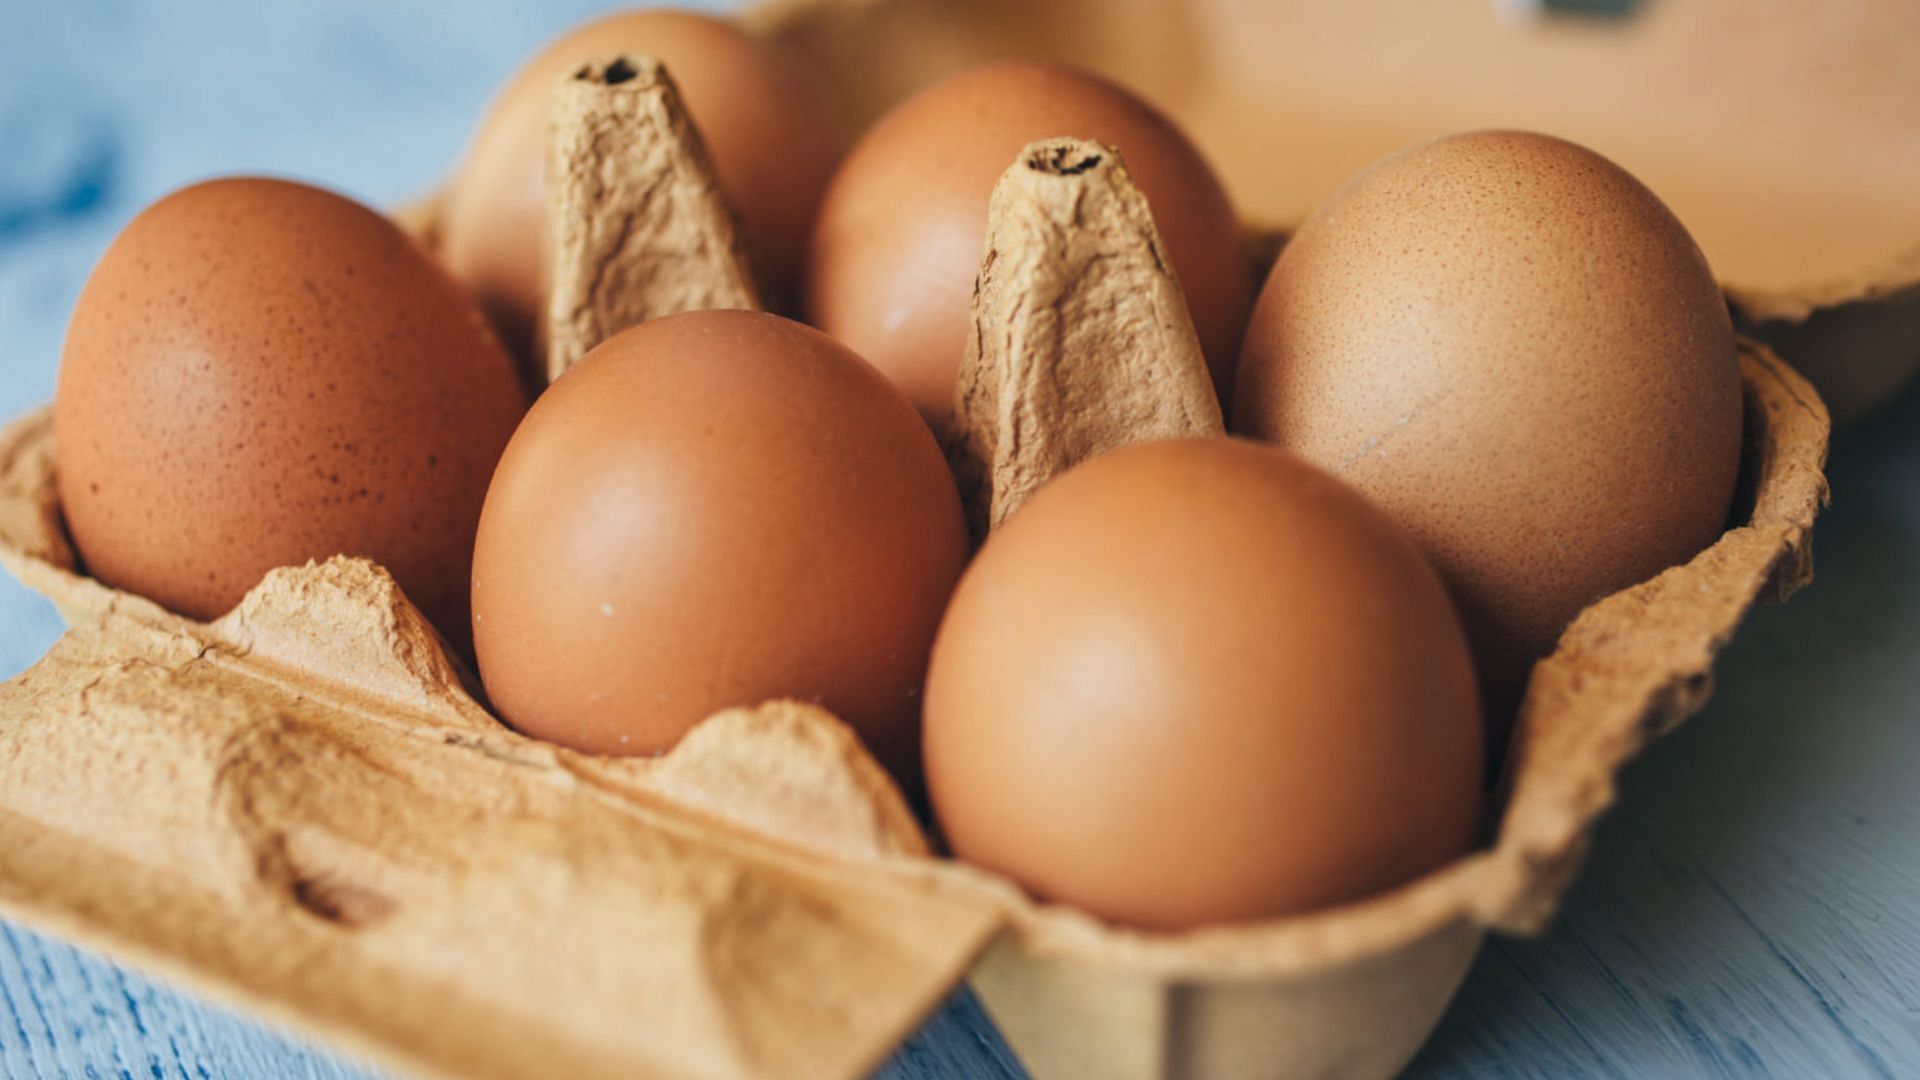 Egg prices on an ever-high (Image via Nacho Mena/Getty Images)